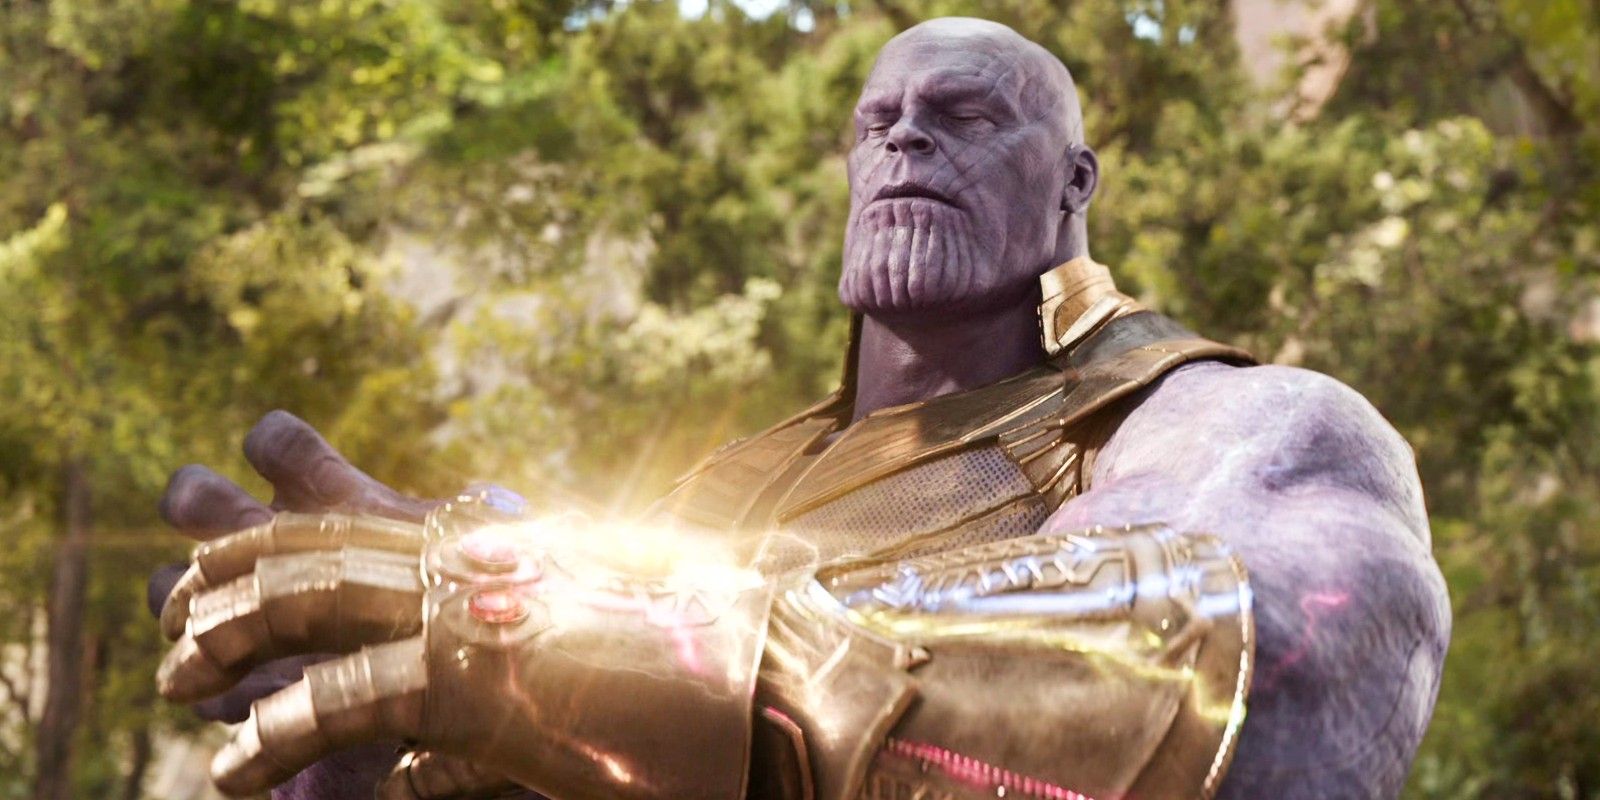 Thanos with Infinity Gauntlet in Avengers Infinity War